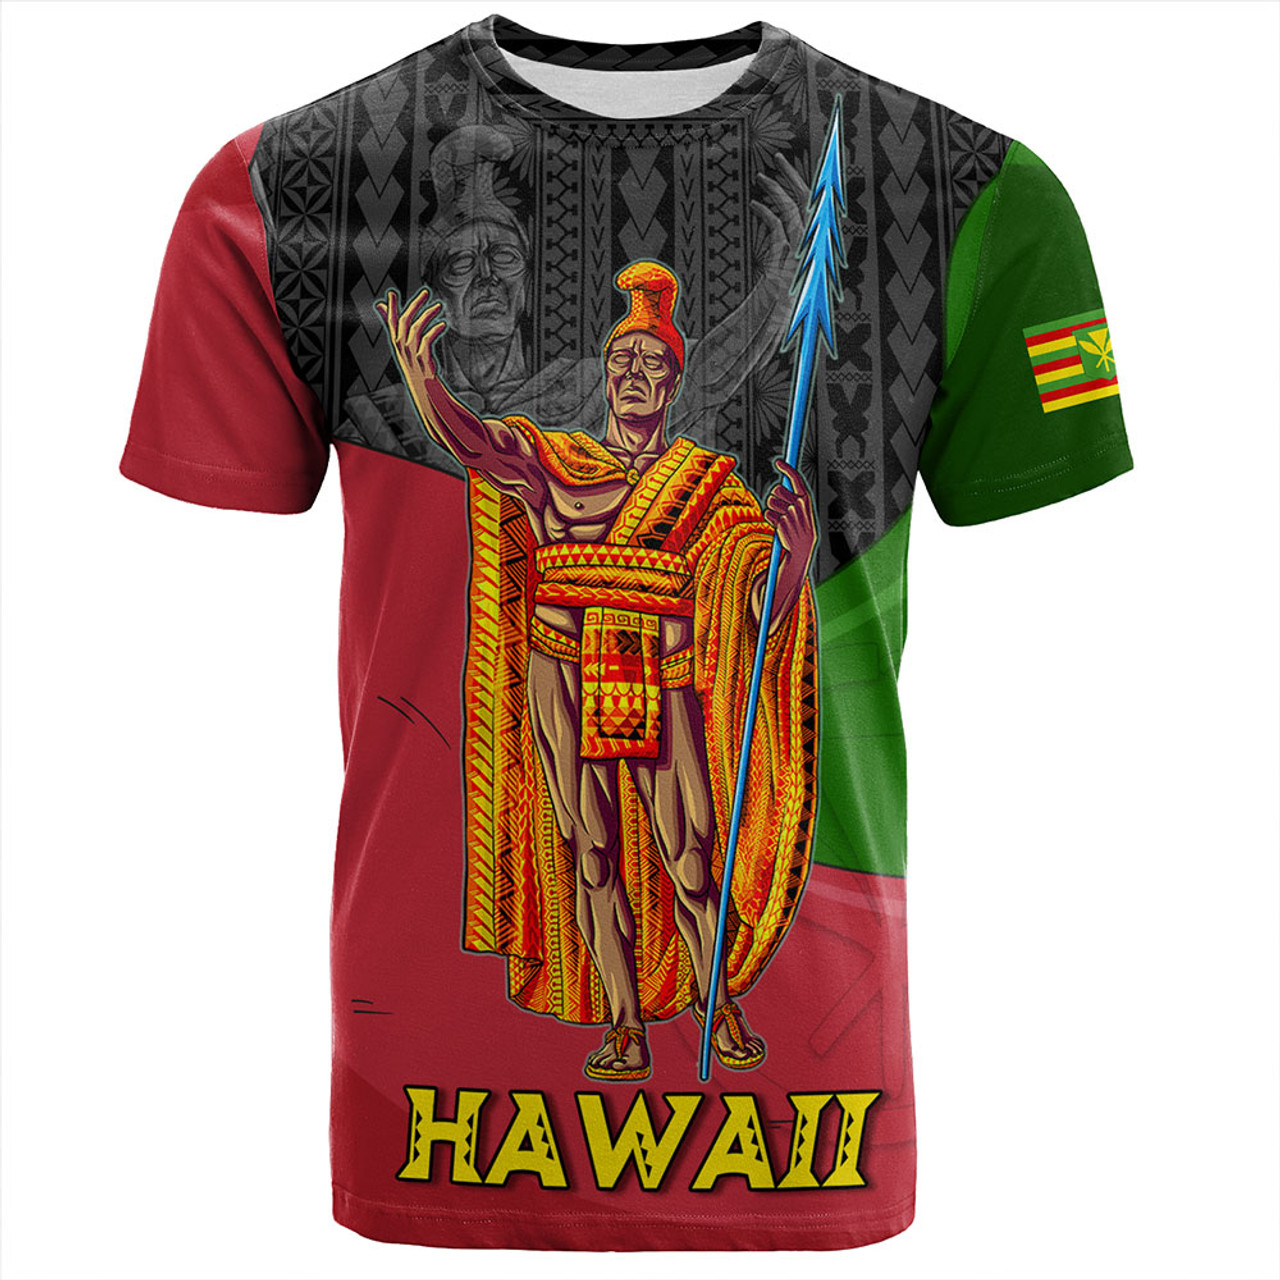 Hawaii T-Shirt Hawaii King With Map And Flag Tribal Patterns